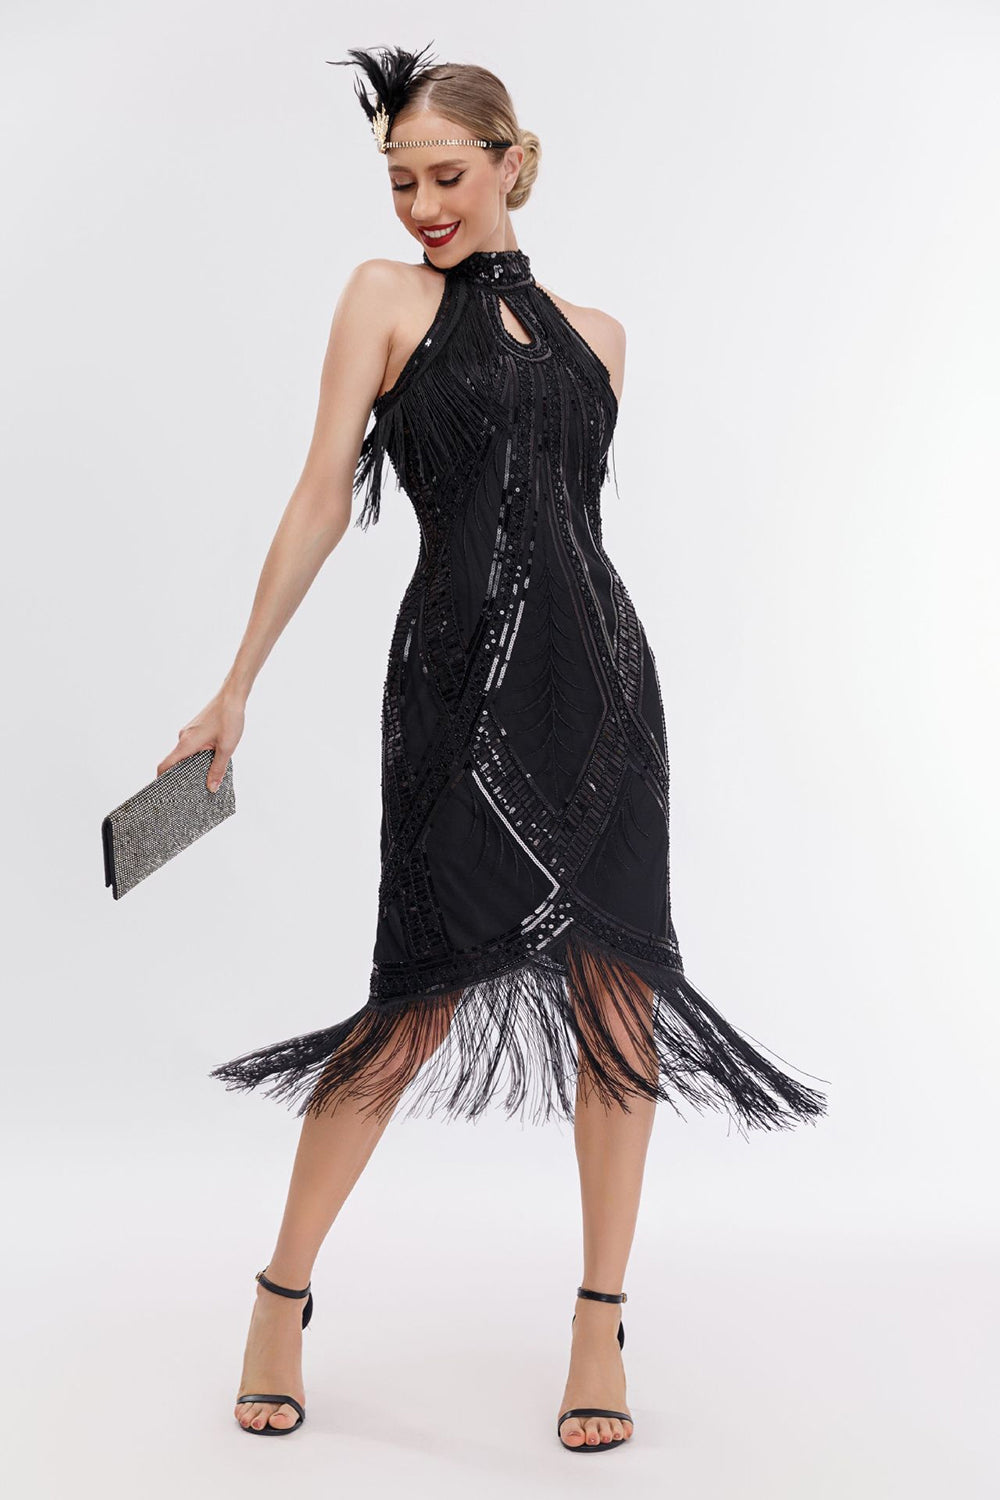 Sparkly Black Round Neck Sequins Fringed Gatsby Dress with Accessories Set